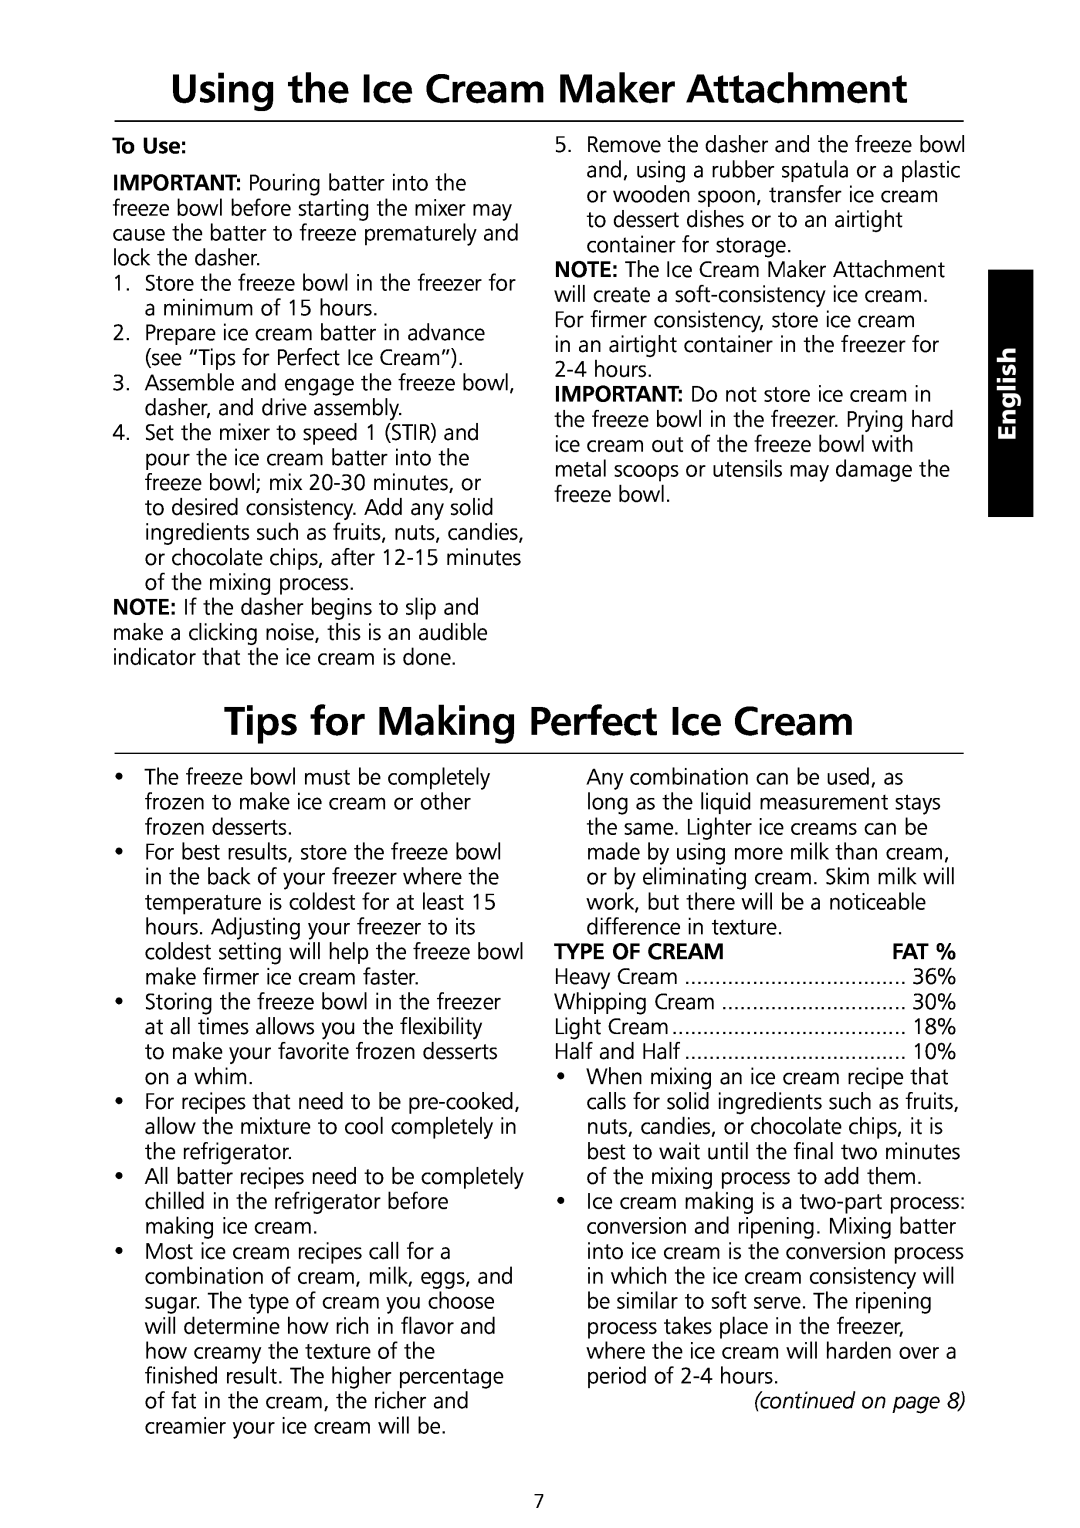 KitchenAid 5KICA0WH manual Using the Ice Cream Maker Attachment, Tips for Making Perfect Ice Cream, English, To Use 